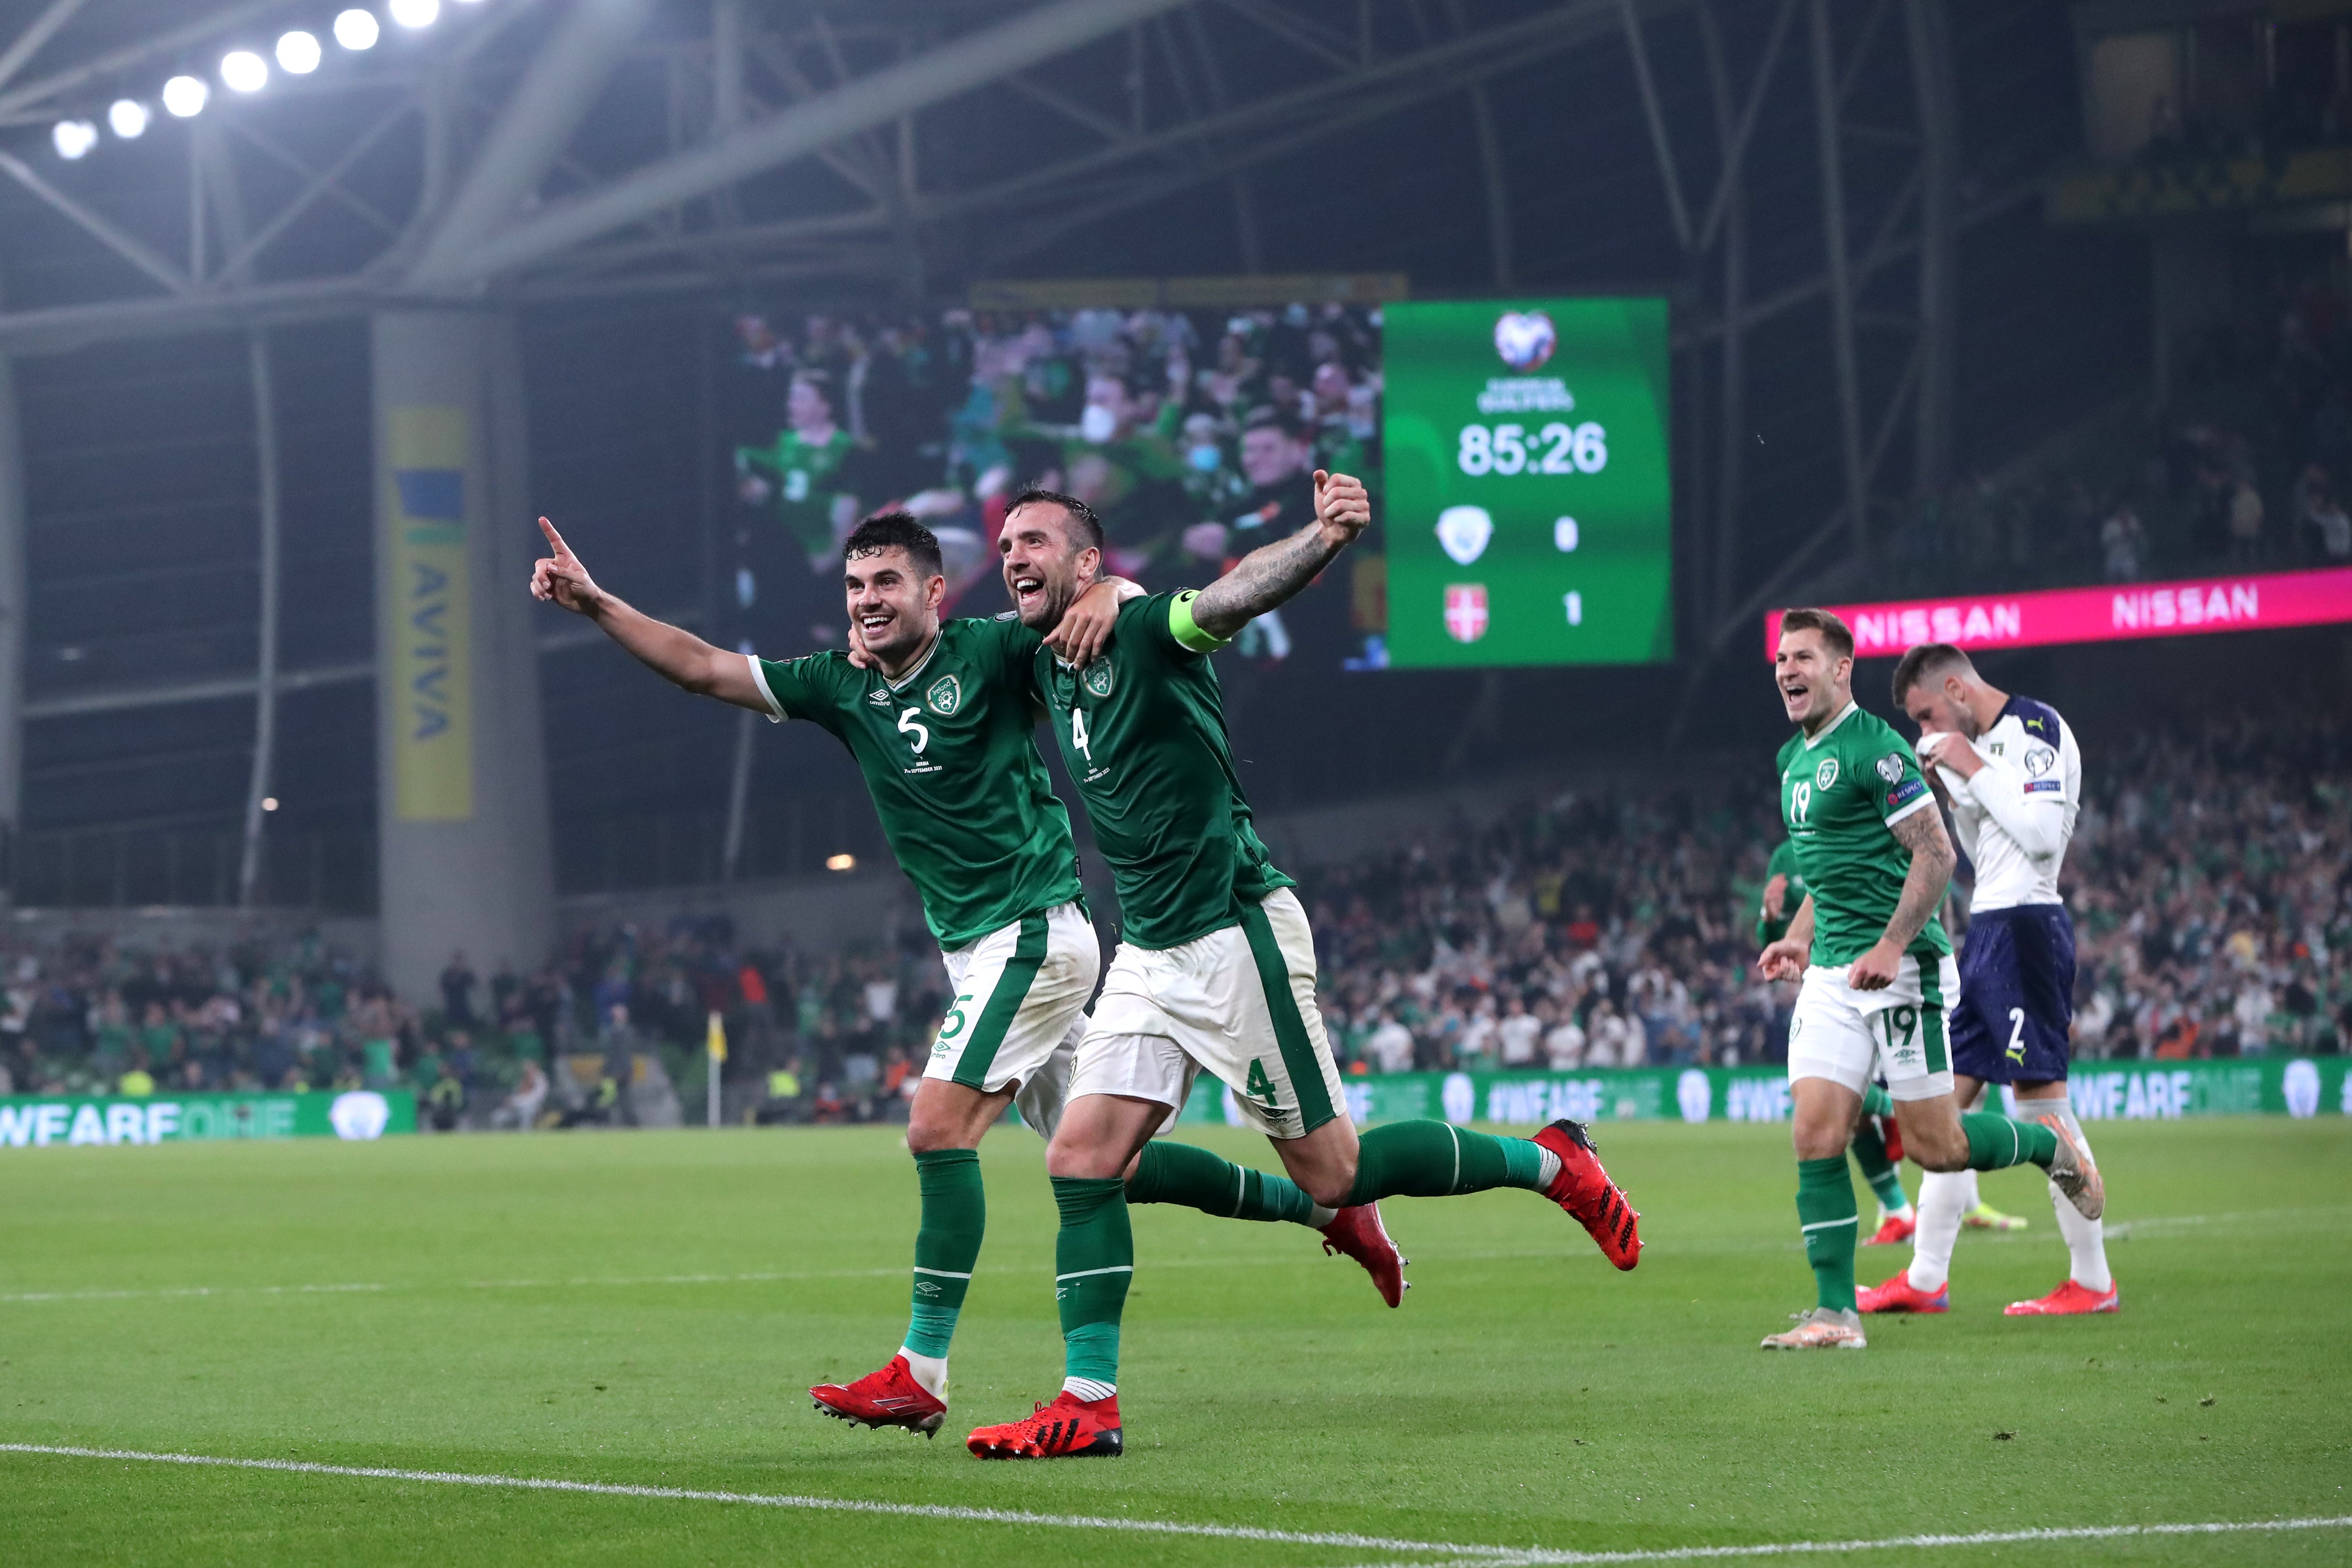 The Republic of Ireland celebrate their equaliser (Niall Carson/PA)